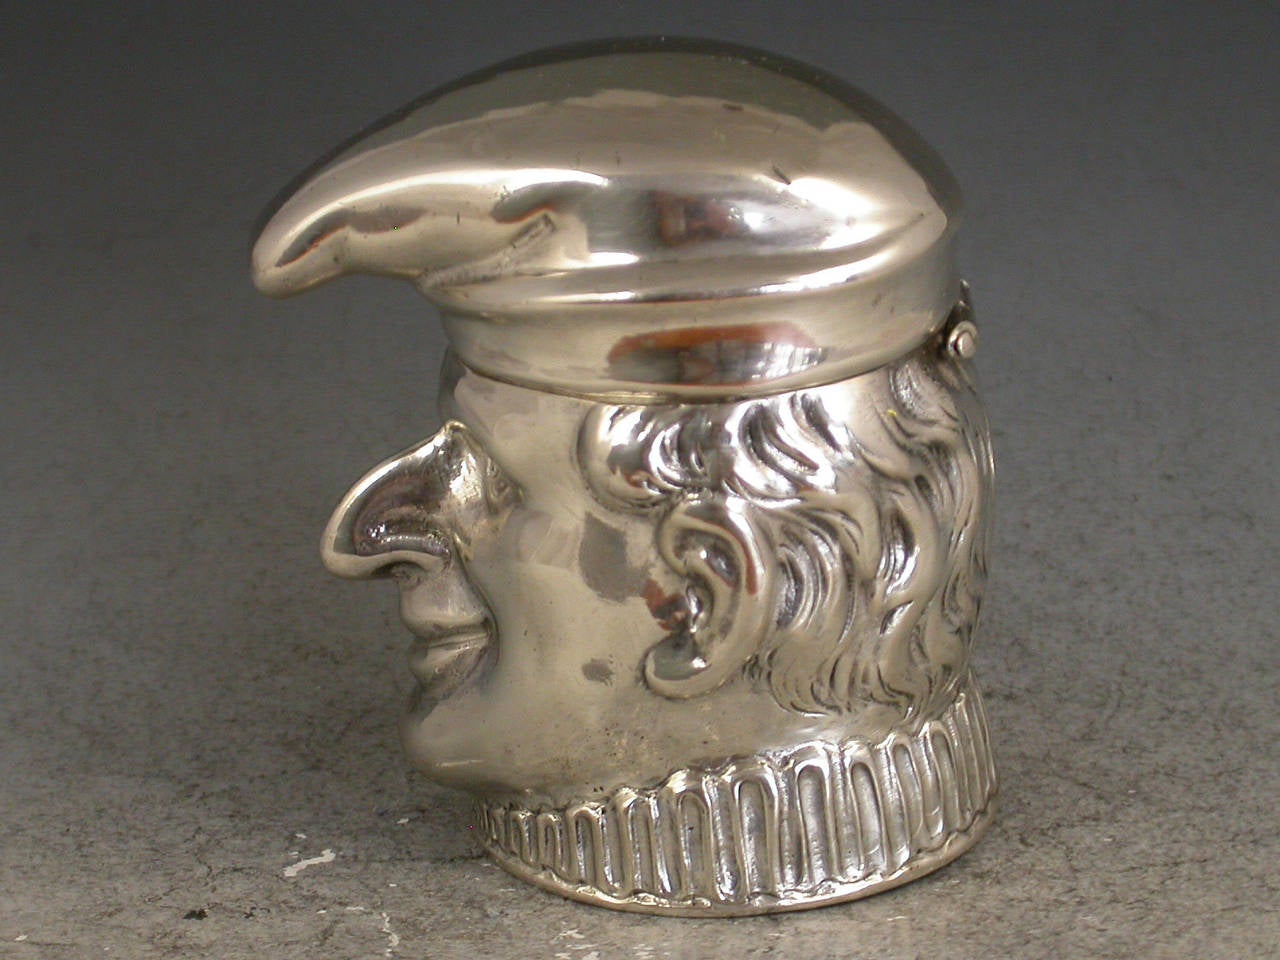 An Edwardian German novelty silver Box or possibly Vesta Case modelled as Mr Punch, his hat forming the hinged lid, silver gilt interior. The ruff could be used as a striker 

Importers mark for M Freidlander & Co, Chester, 1908